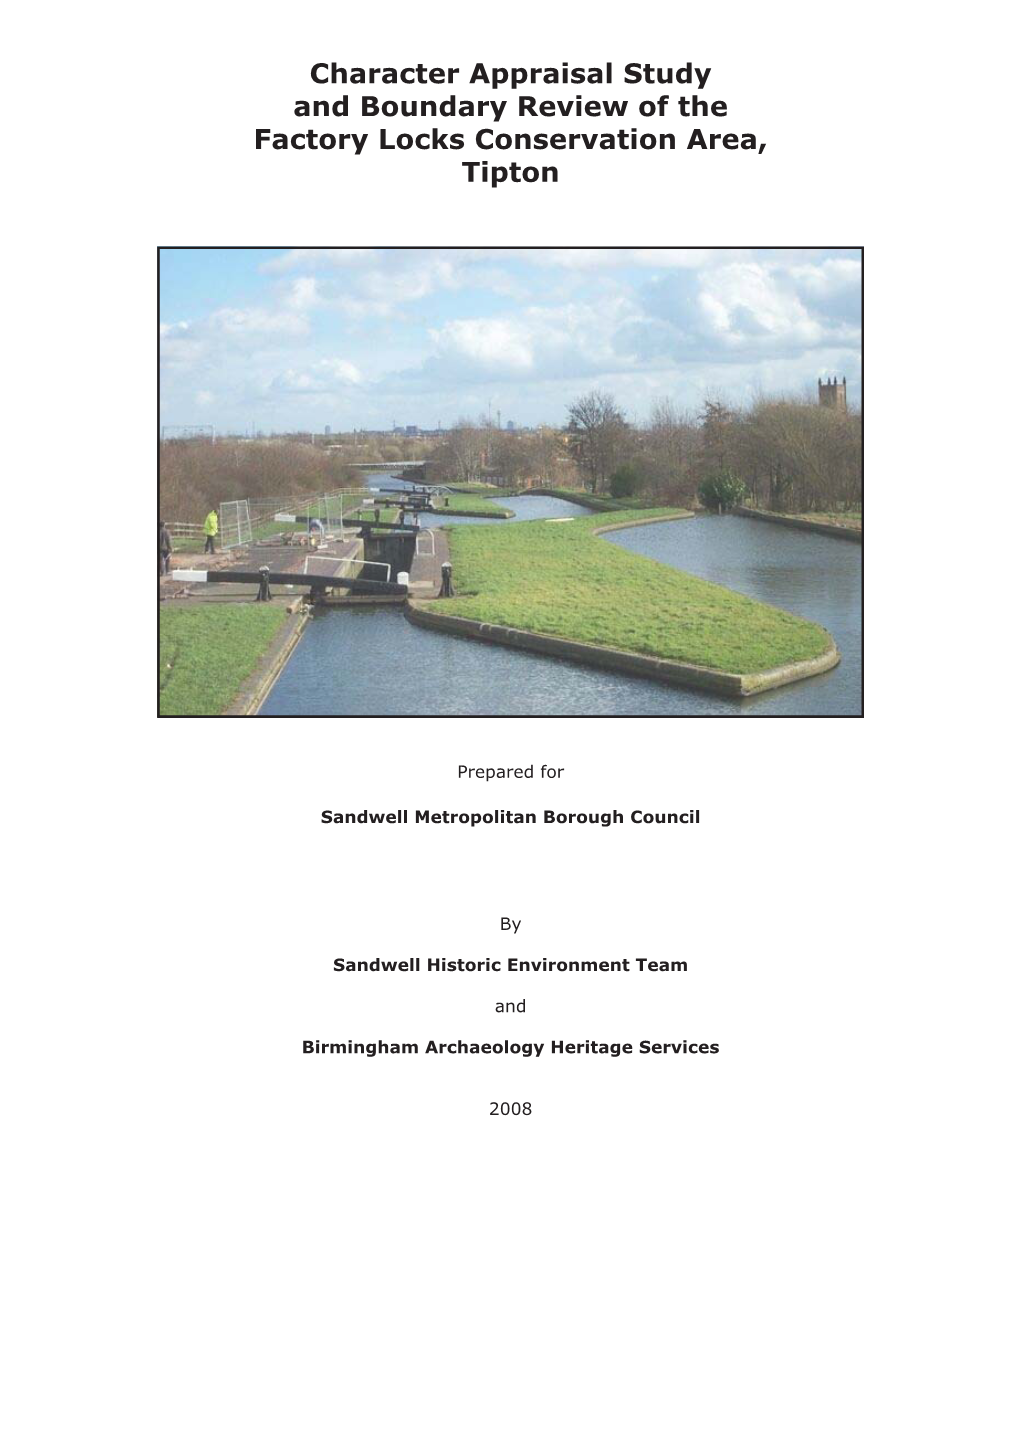 Character Appraisal Study and Boundary Review of the Factory Locks Conservation Area, Tipton